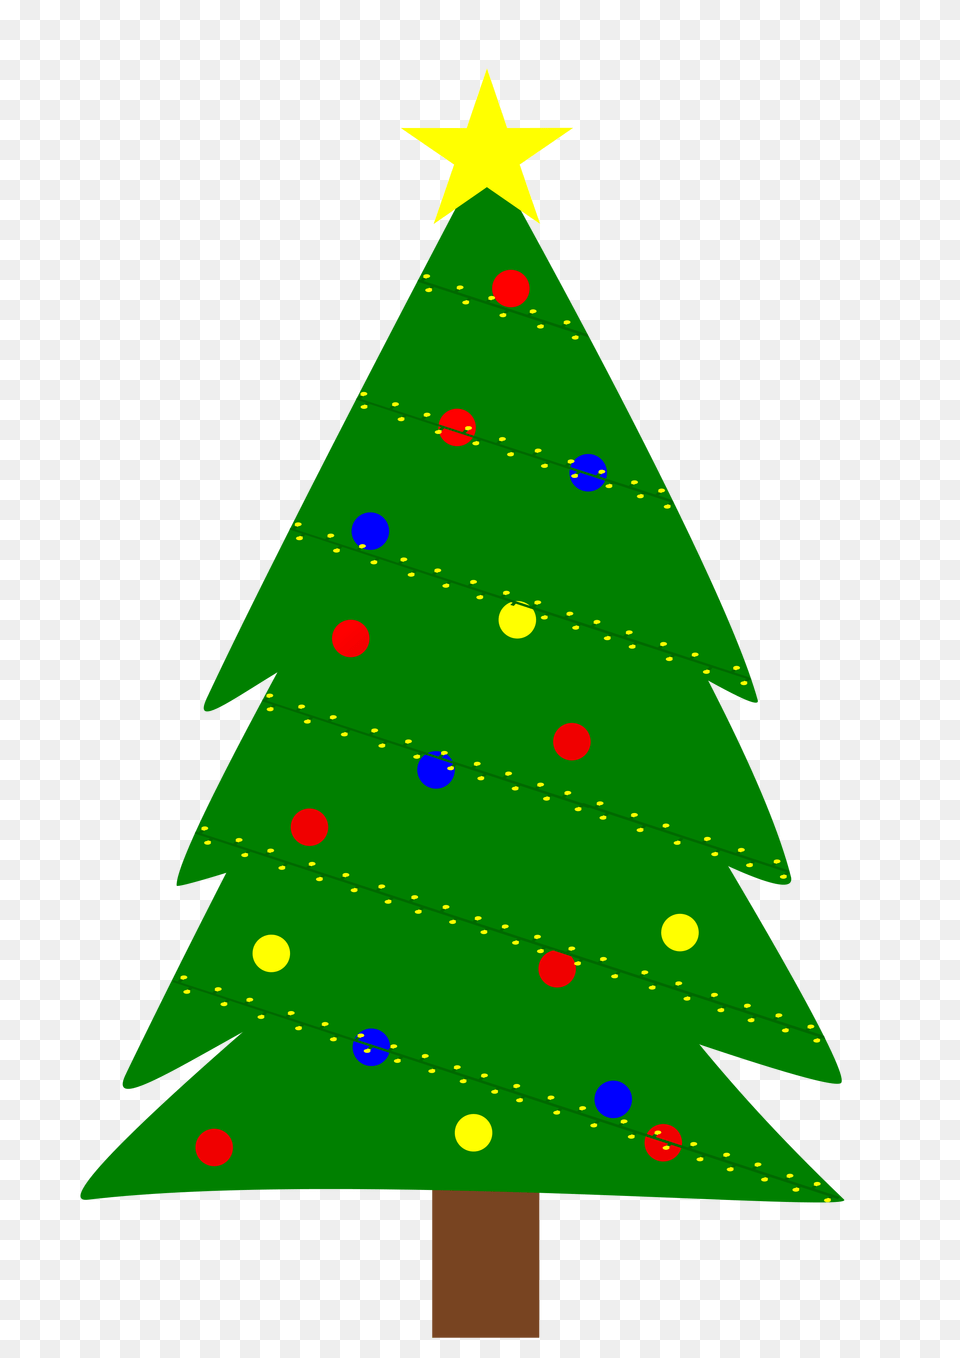 Decorated Christmas Tree With Star Svg Vector Purple Christmas Tree Drawing, Rocket, Weapon, Christmas Decorations, Festival Free Png Download